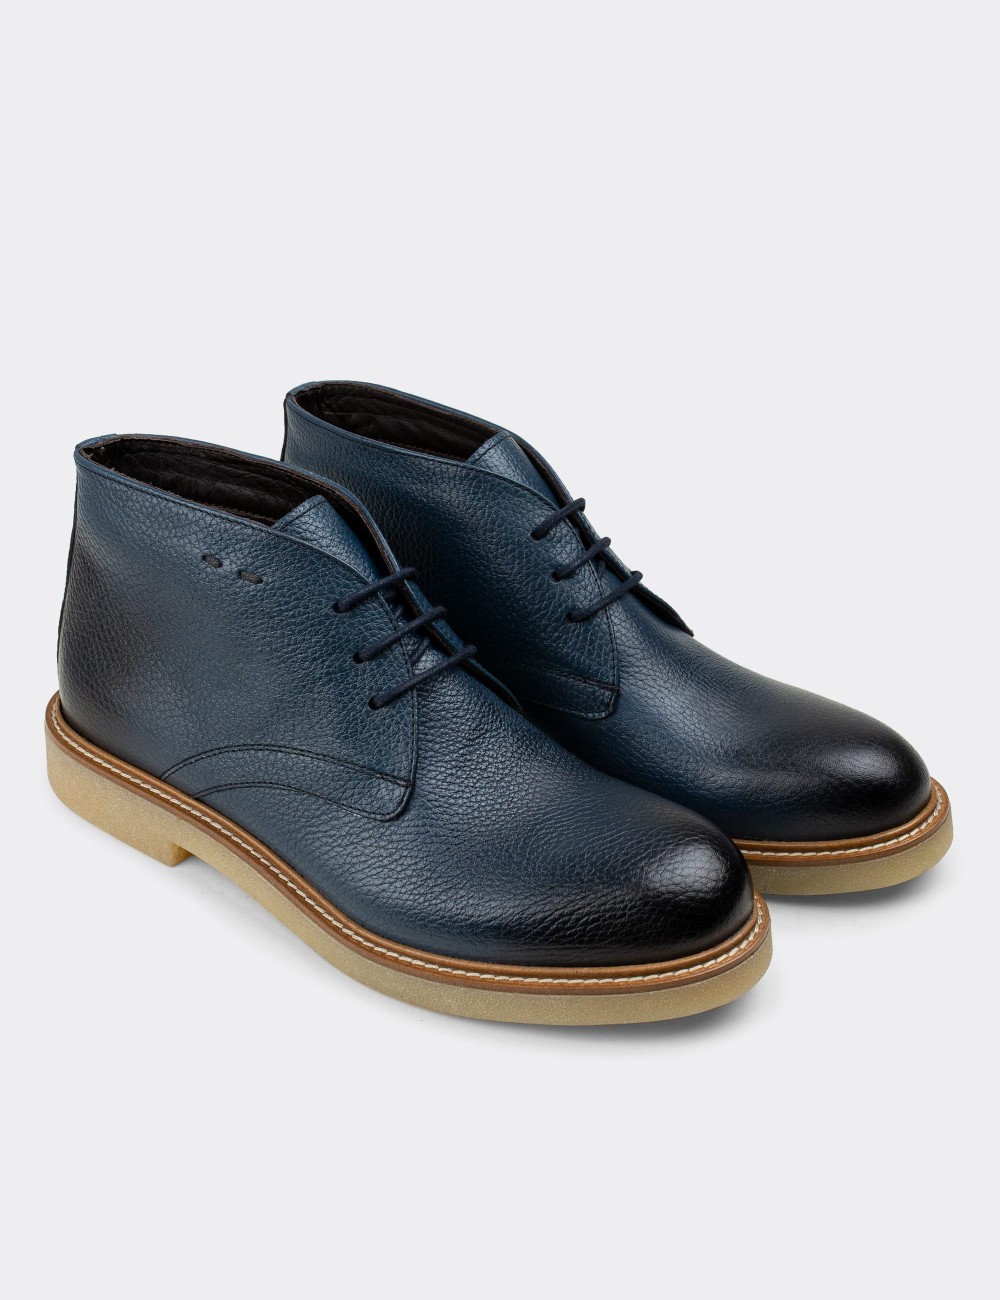 Blue  Leather Desert Boots - 01295MMVIC01